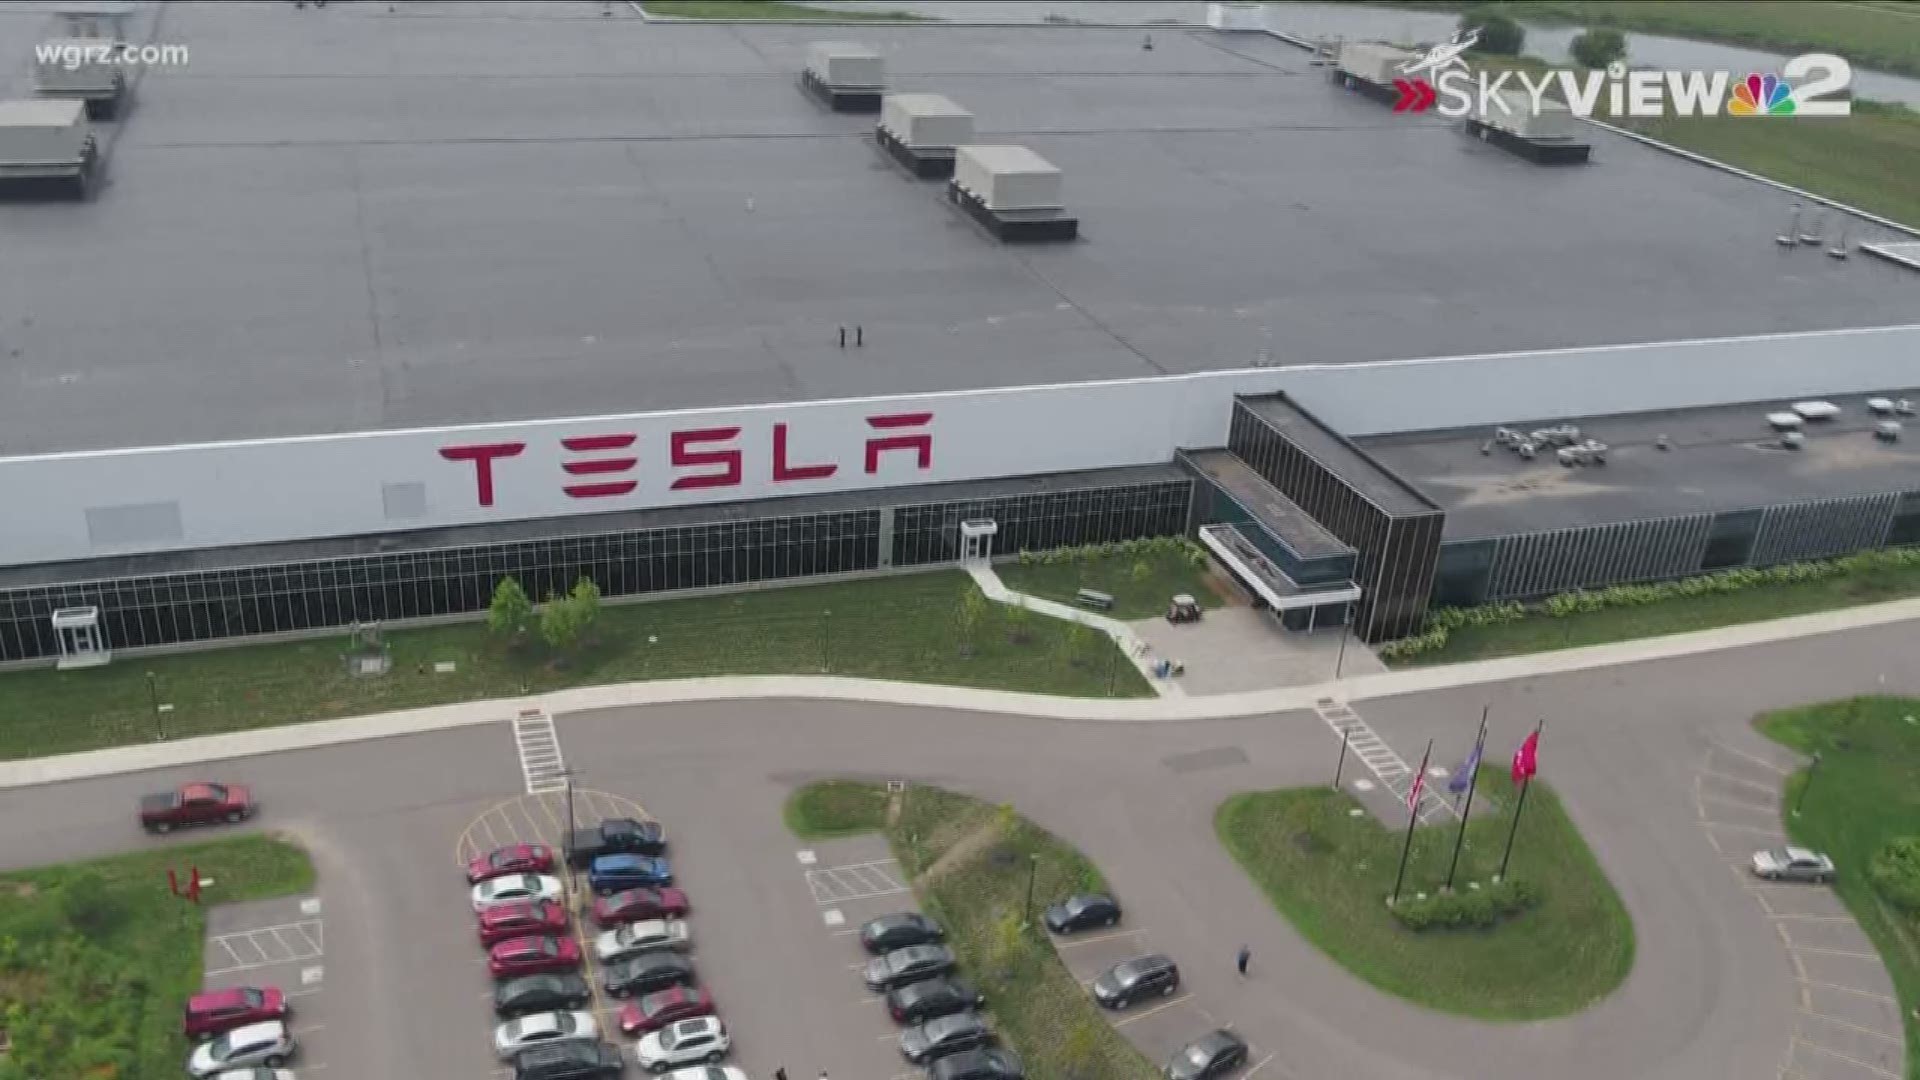 Jim Heaney from our non-profit partners at Investigative Post looks at the latest Tesla earnings report and the concern surrounding the south Buffalo Tesla facility.